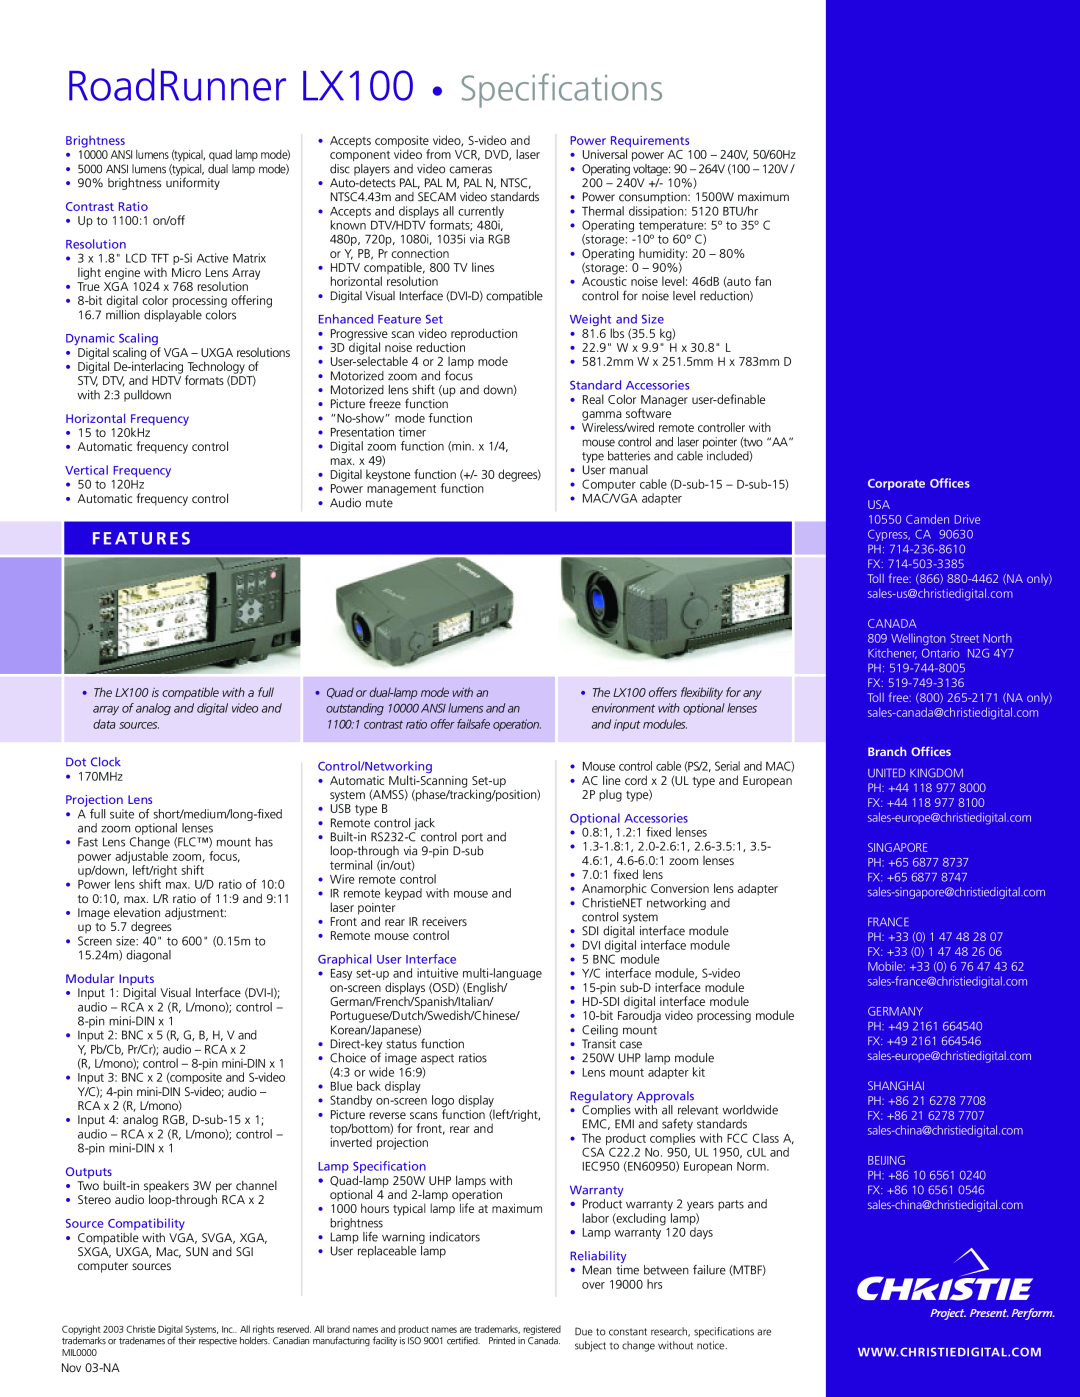 Christie Digital Systems manual F E At U R E S, RoadRunner LX100 Specifications, The LX100 is compatible with a full 